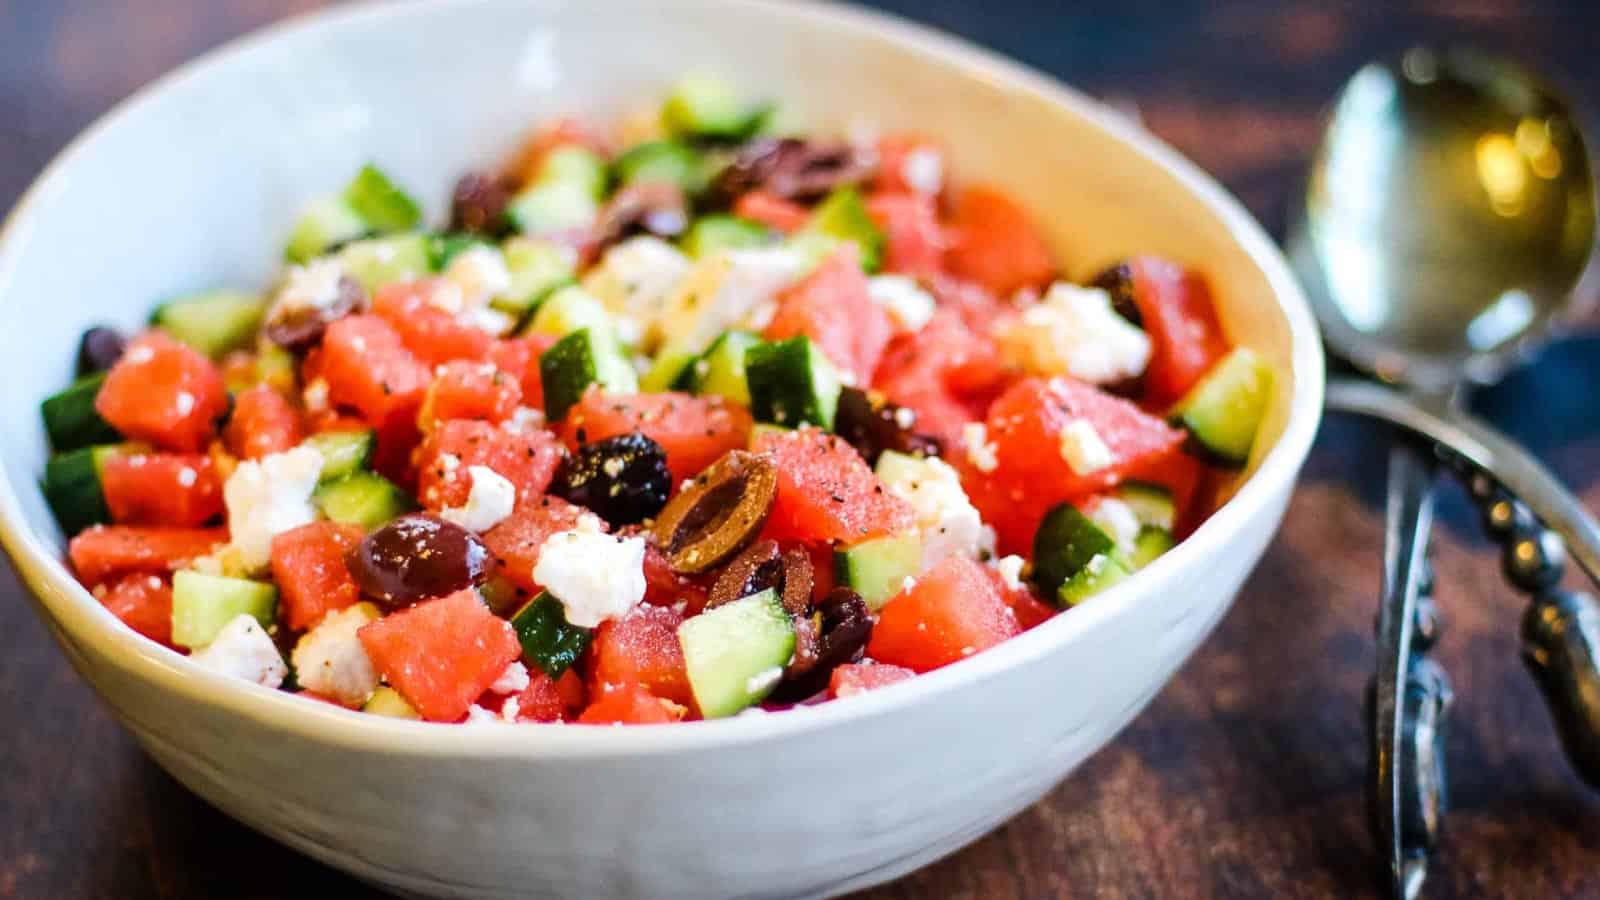 Watermelon Feta Salad with Kalamata Olives is a refreshing summer side dish. With only 5 ingredients, it is quick and easy to make and so refreshing!